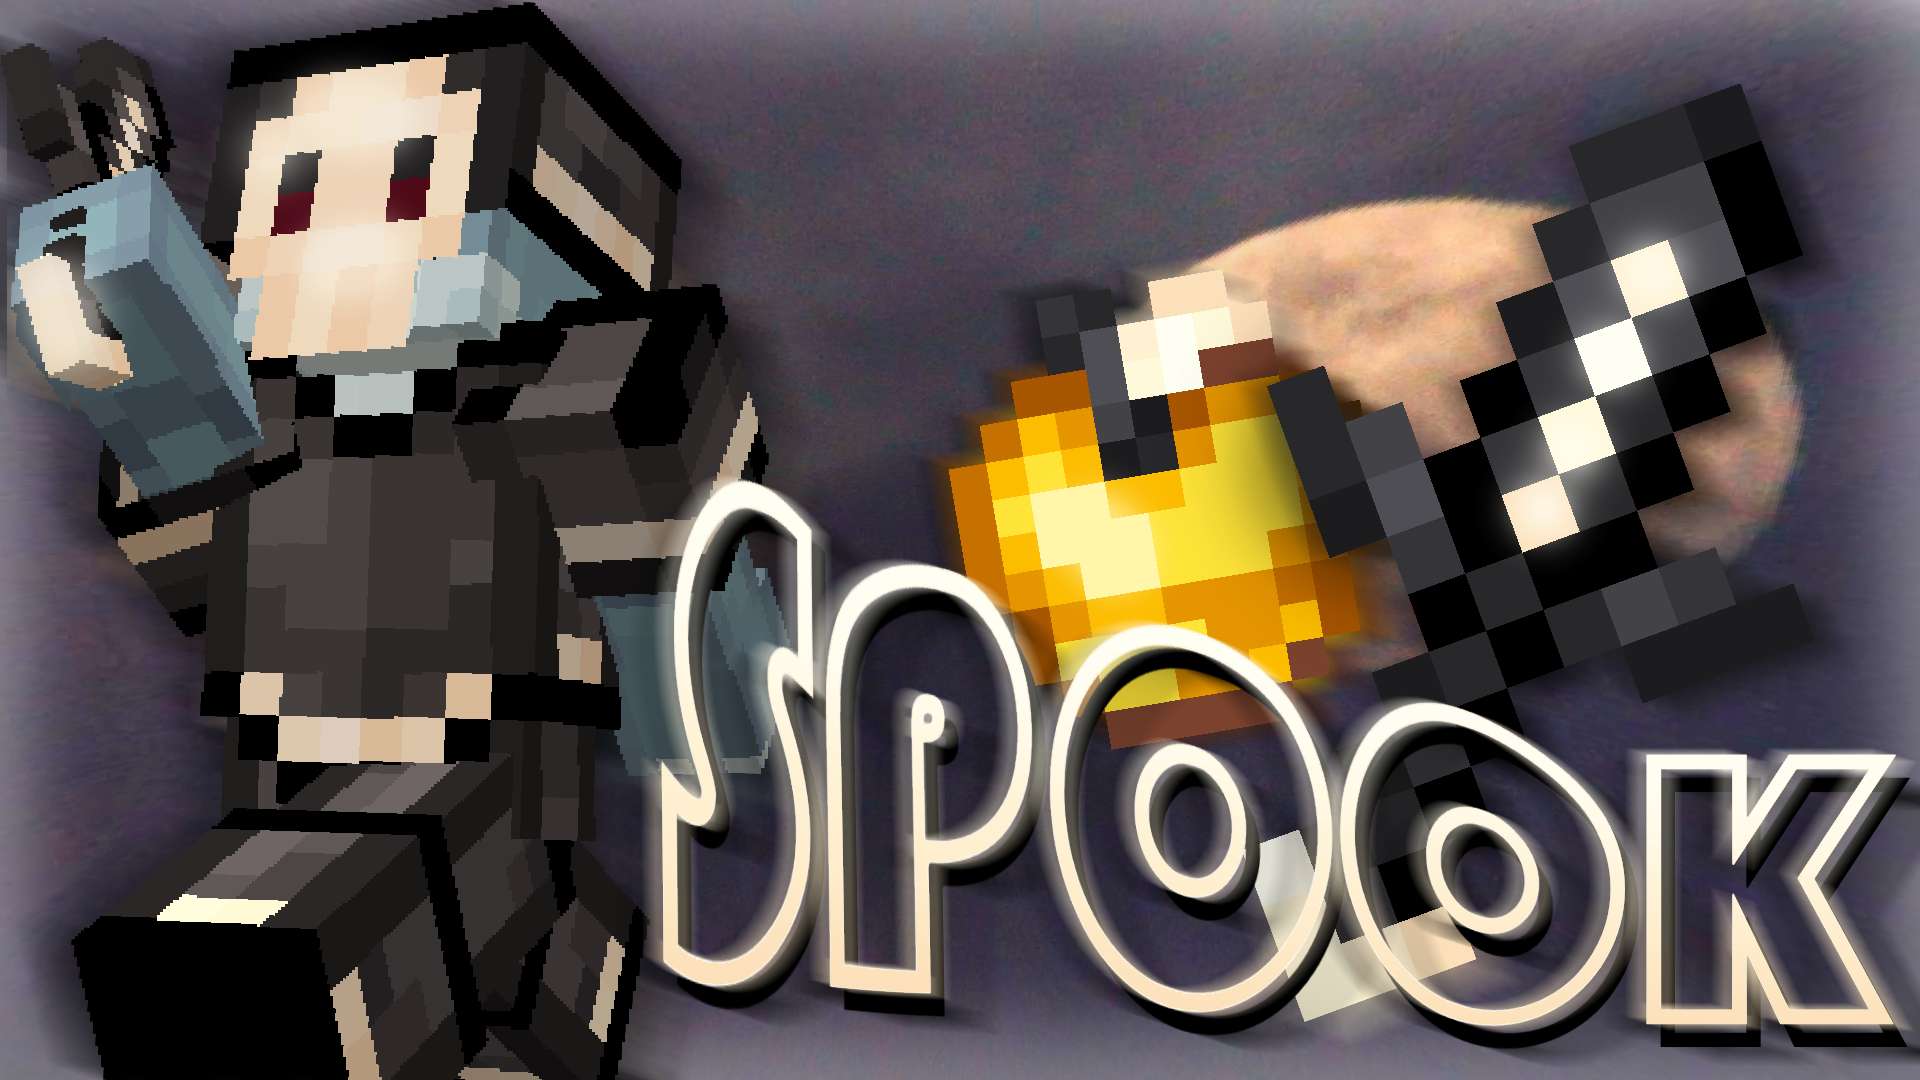 SPOOK (collab w/ Dempy & Spacy) 16 by Wyvernishpacks on PvPRP